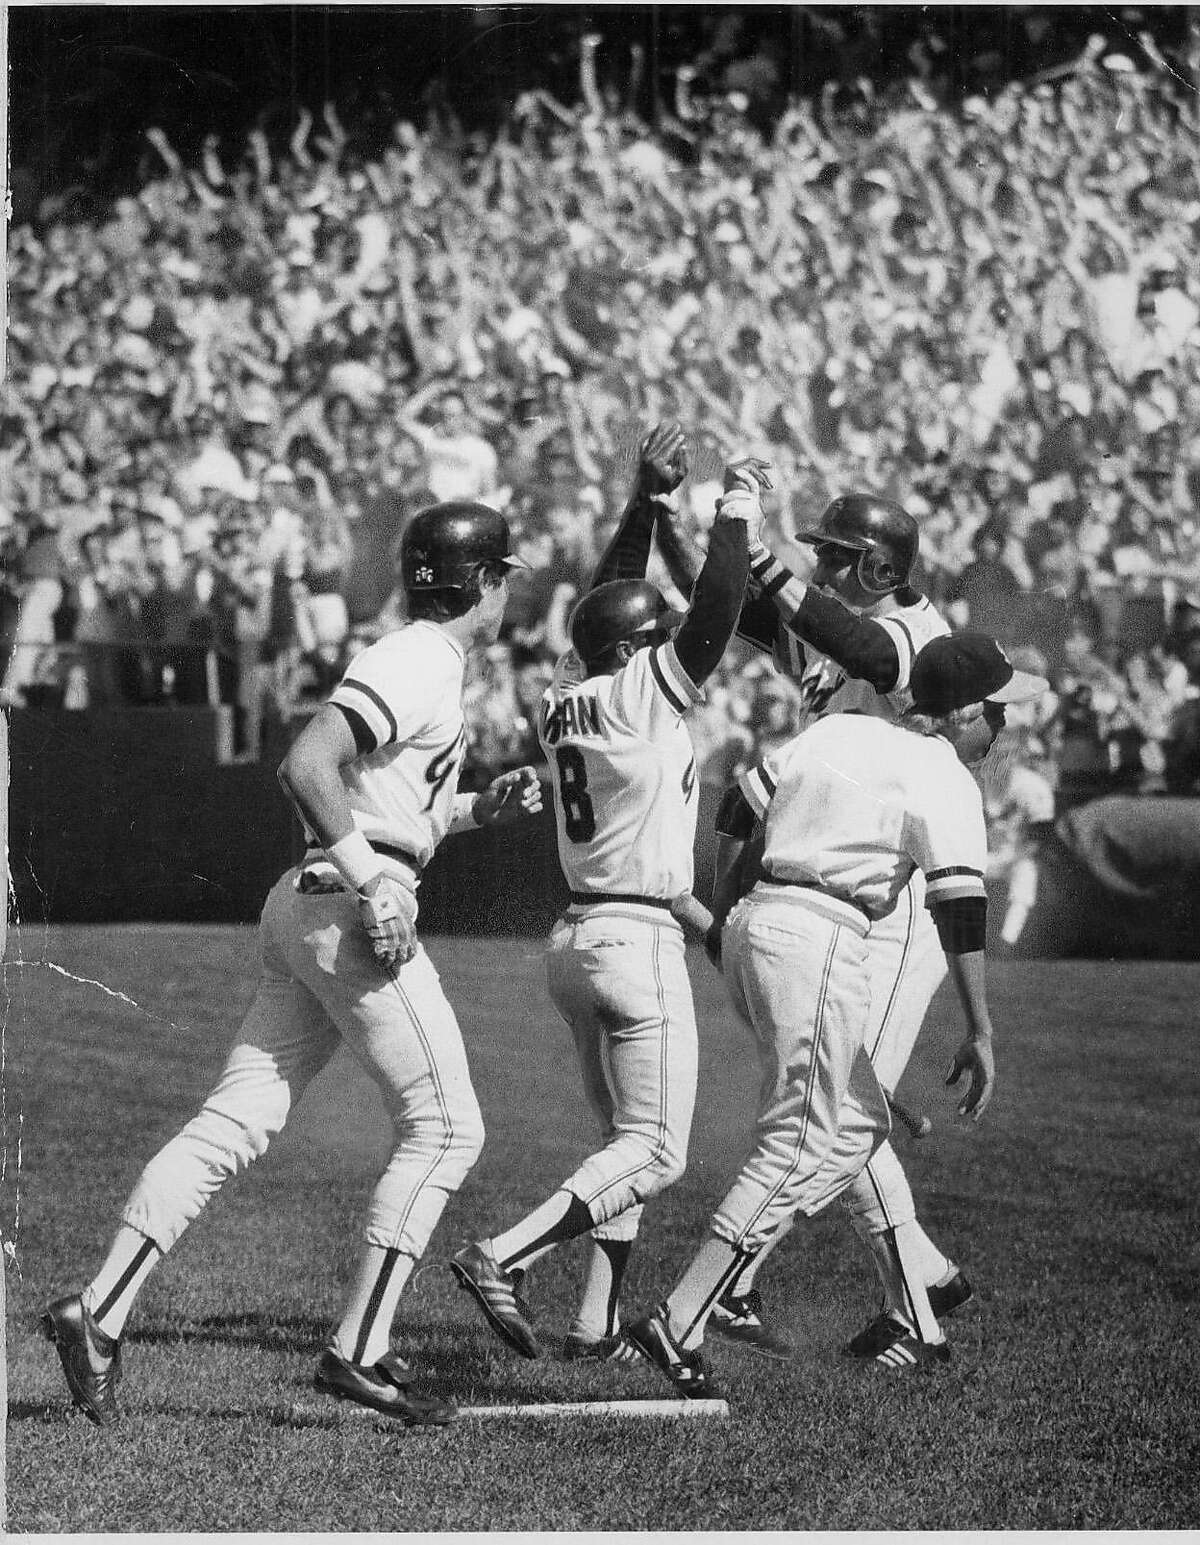 Giants teammates greet Joe Morgan at home plate after his home run on the last day of the 1982 season eliminated the Dodgers from the playoffs.